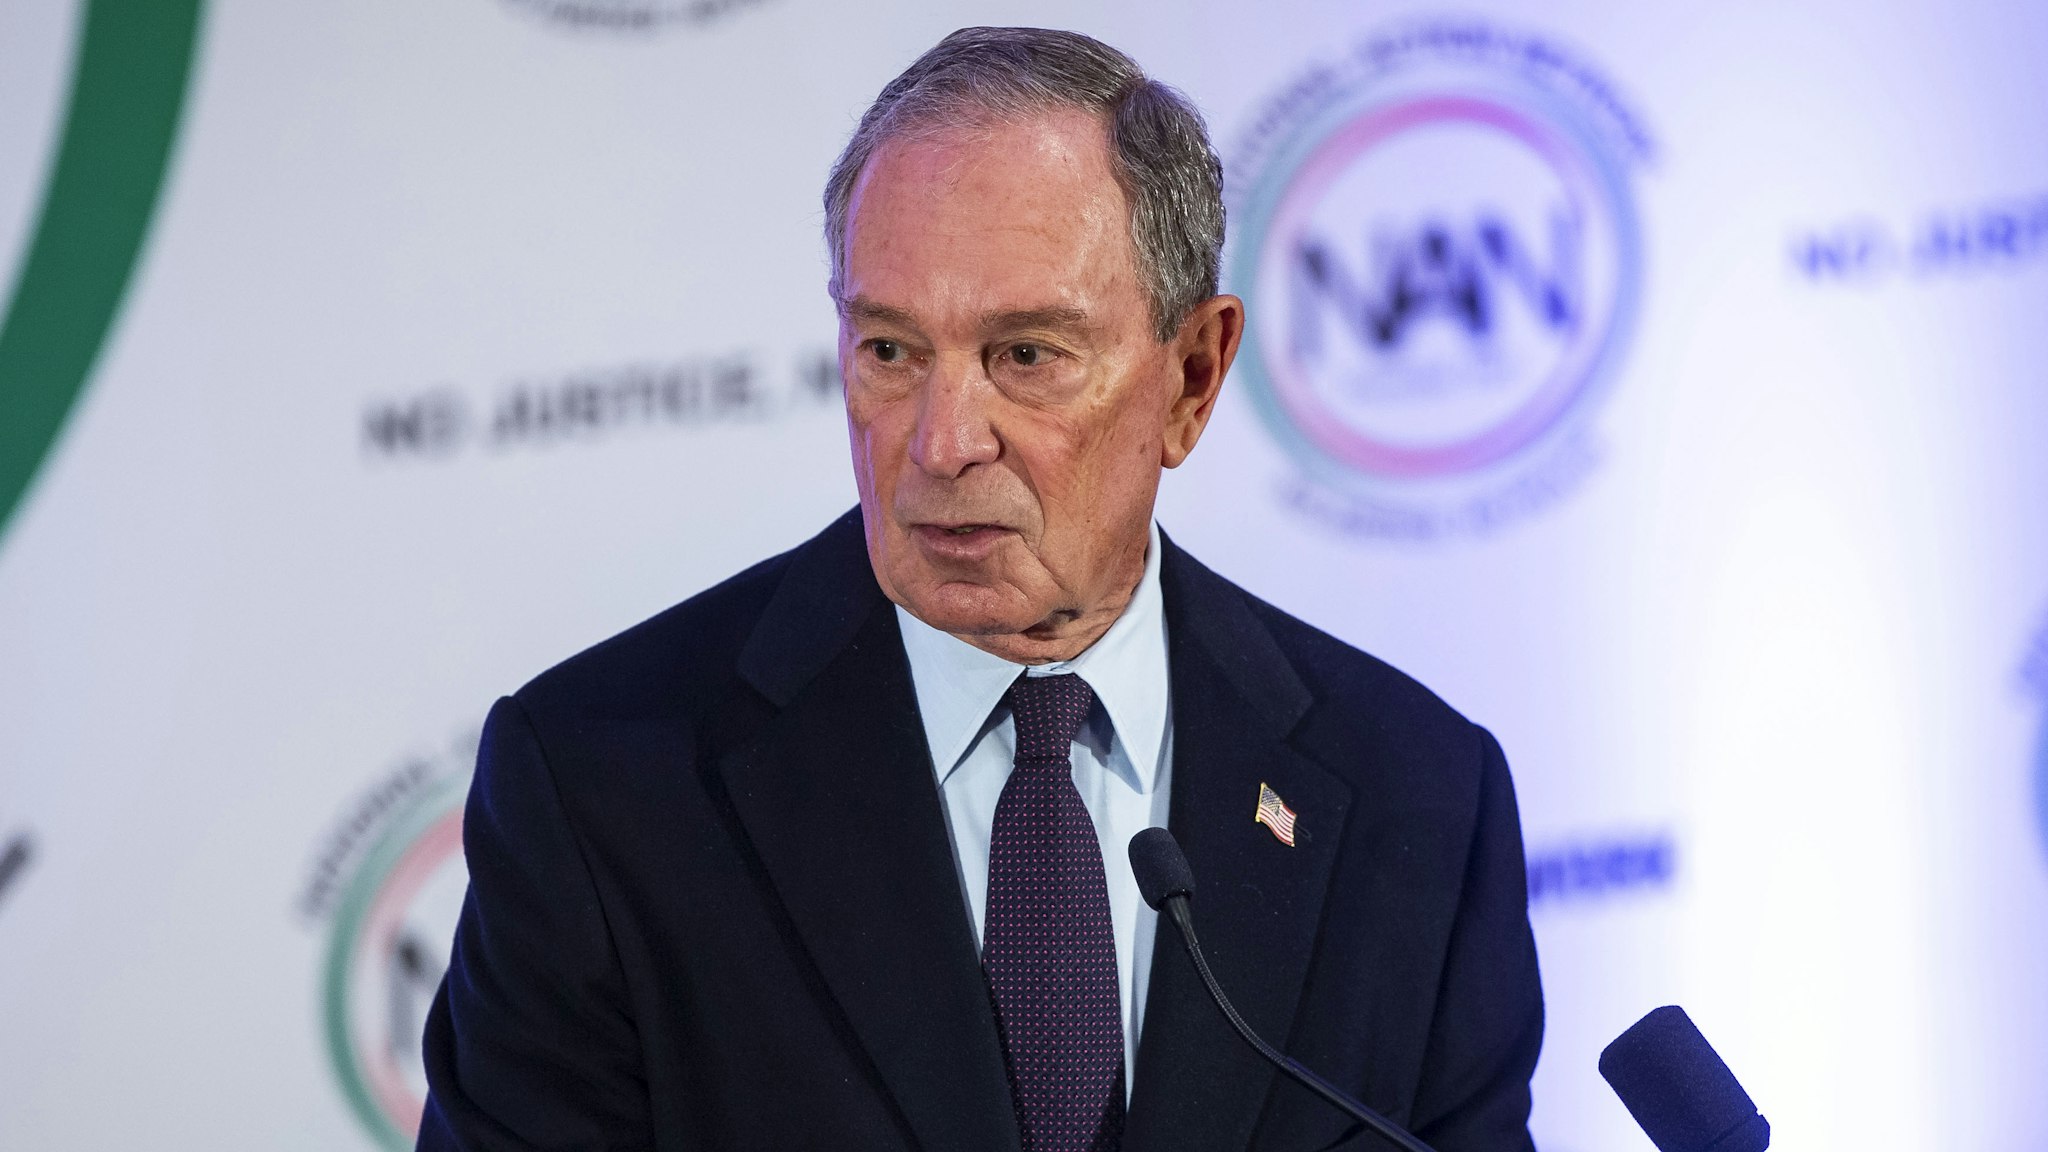 WASHINGTON, DC - JANUARY 21: Former New York City Mayor Michael Bloomberg speaks during the National Action Network Breakfast on January 21, 2019 in Washington, DC. Martin Luther King III was among the attendees.